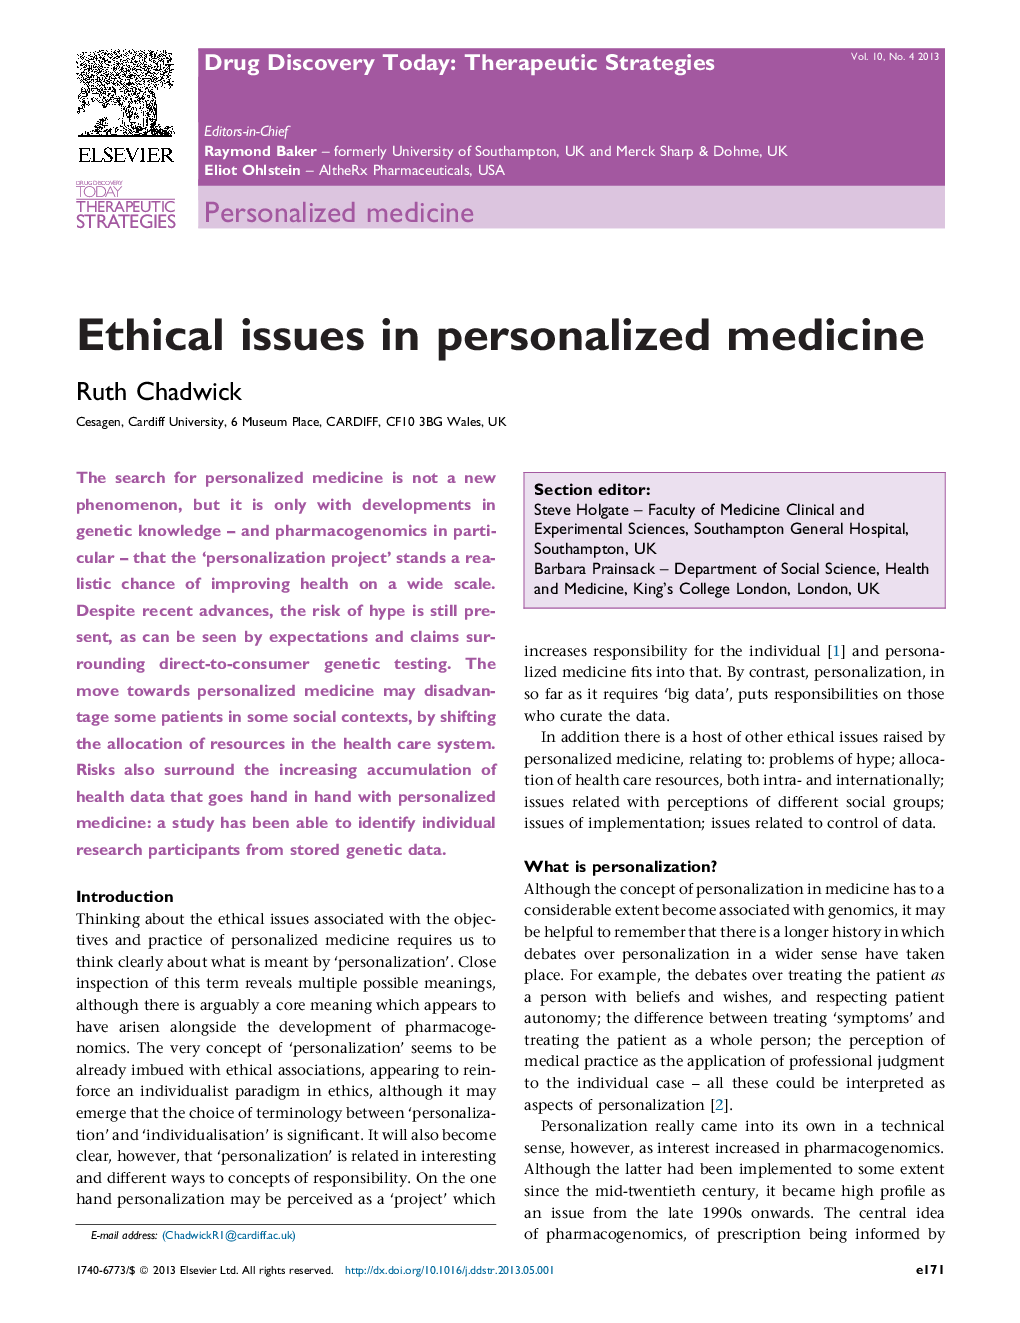 Ethical issues in personalized medicine